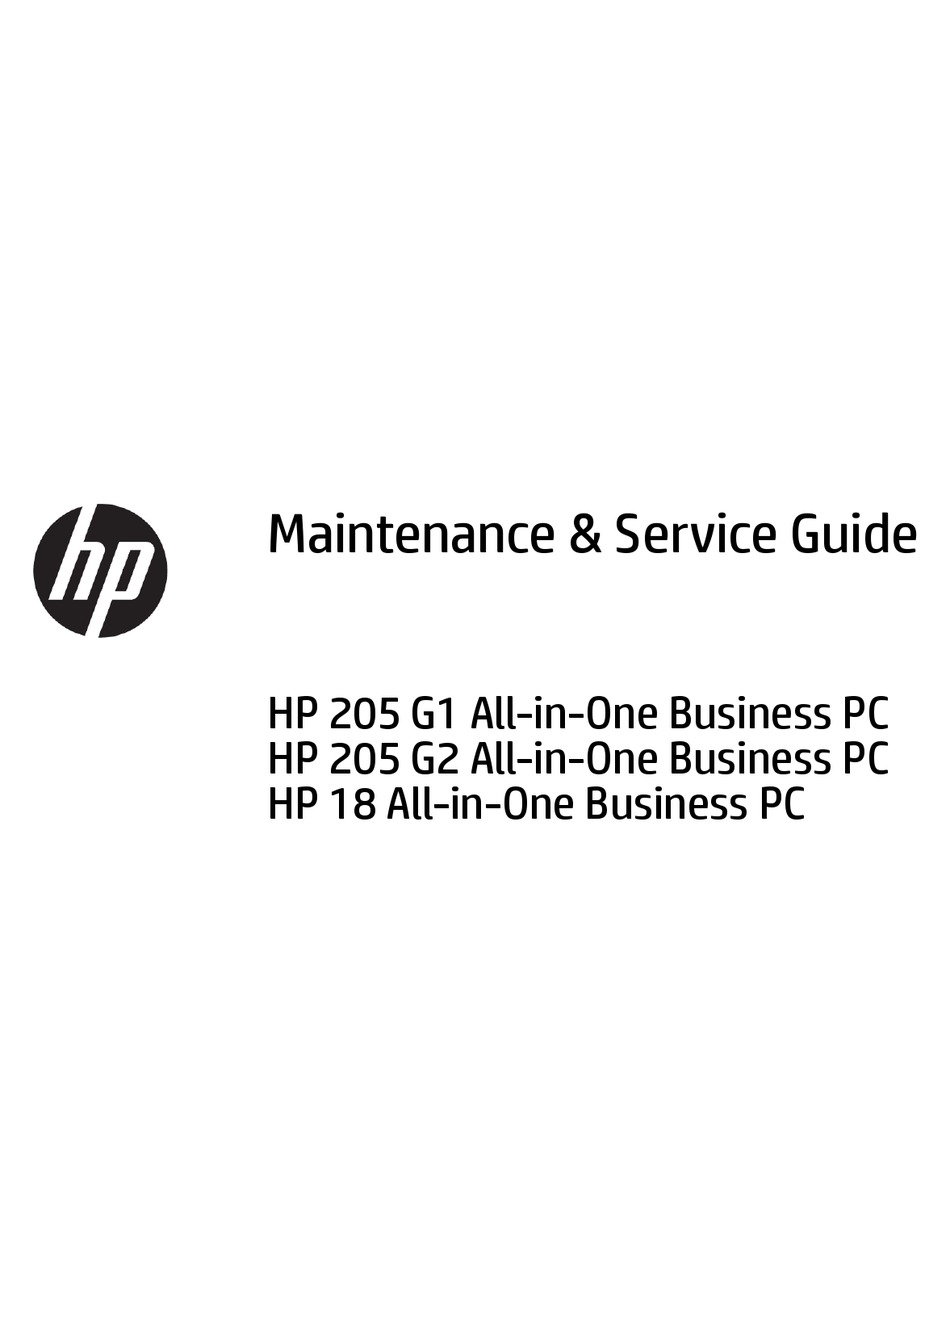 Resetting The Setup And Power-On Password; Clearing And Resetting The Cmos  - HP 205 G1 Maintenance & Service Manual [Page 120]